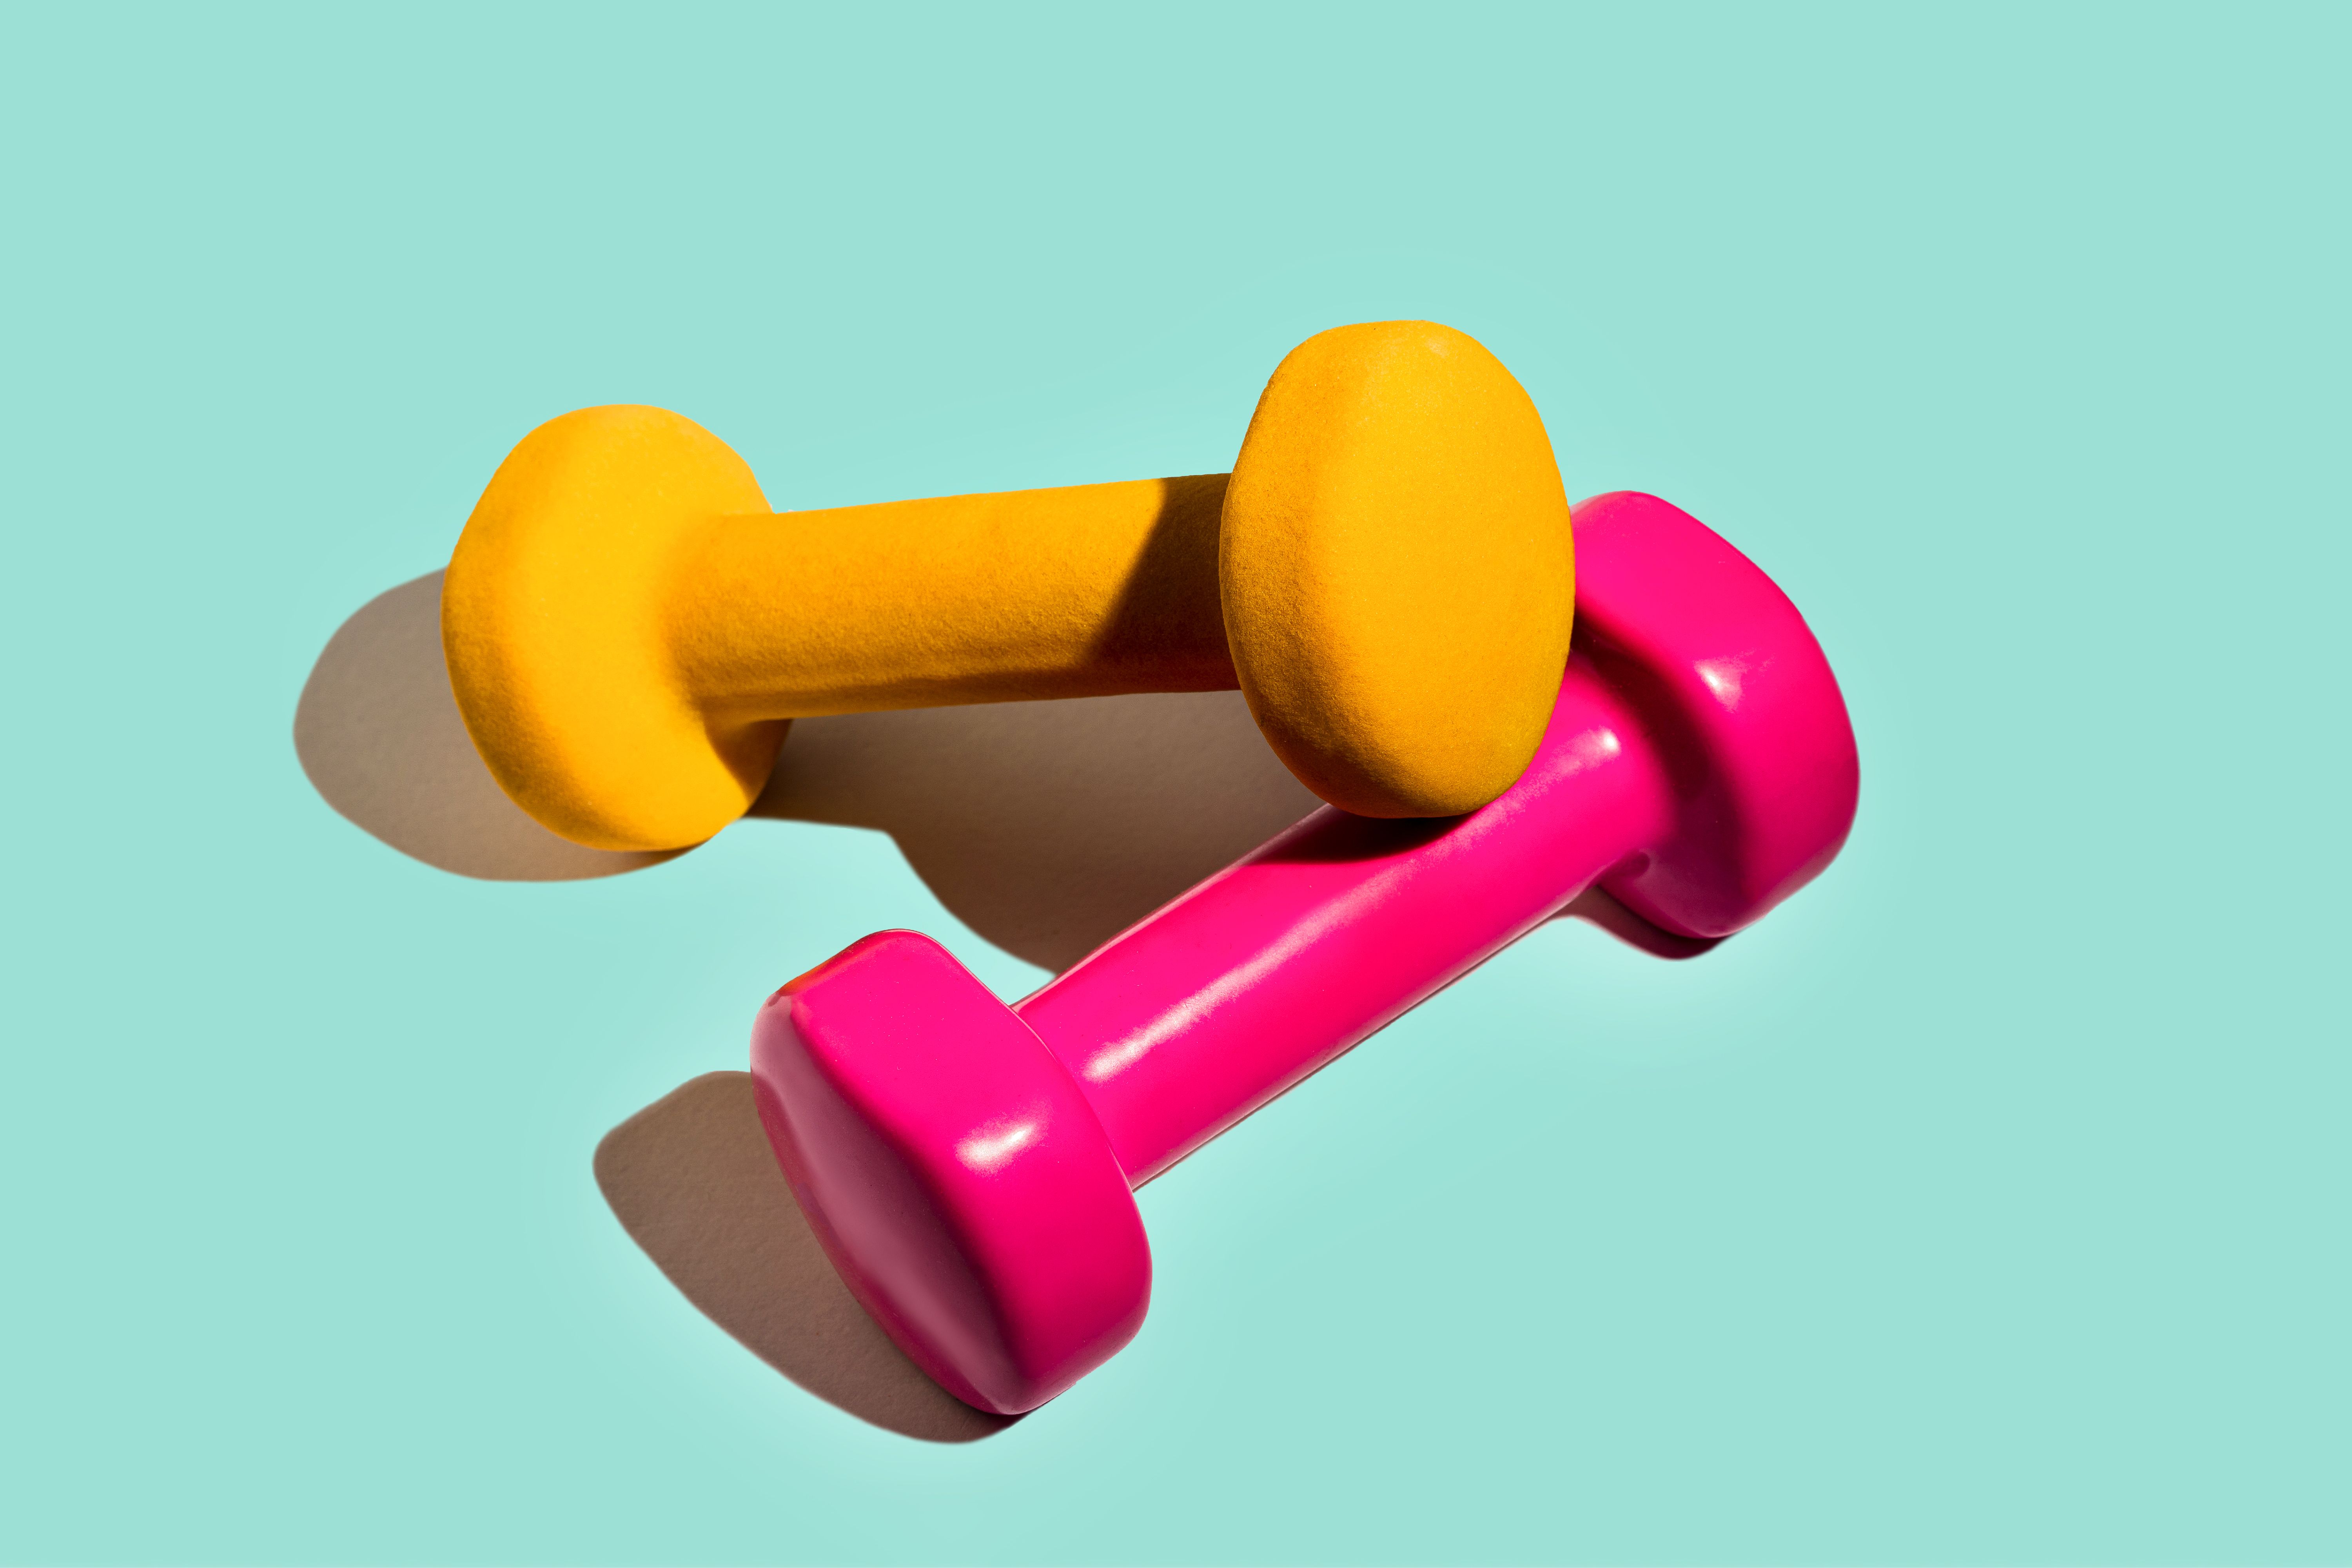 https://hips.hearstapps.com/hmg-prod/images/sport-lifestyle-concept-with-pink-yellow-dumbbells-royalty-free-image-1678649346.jpg